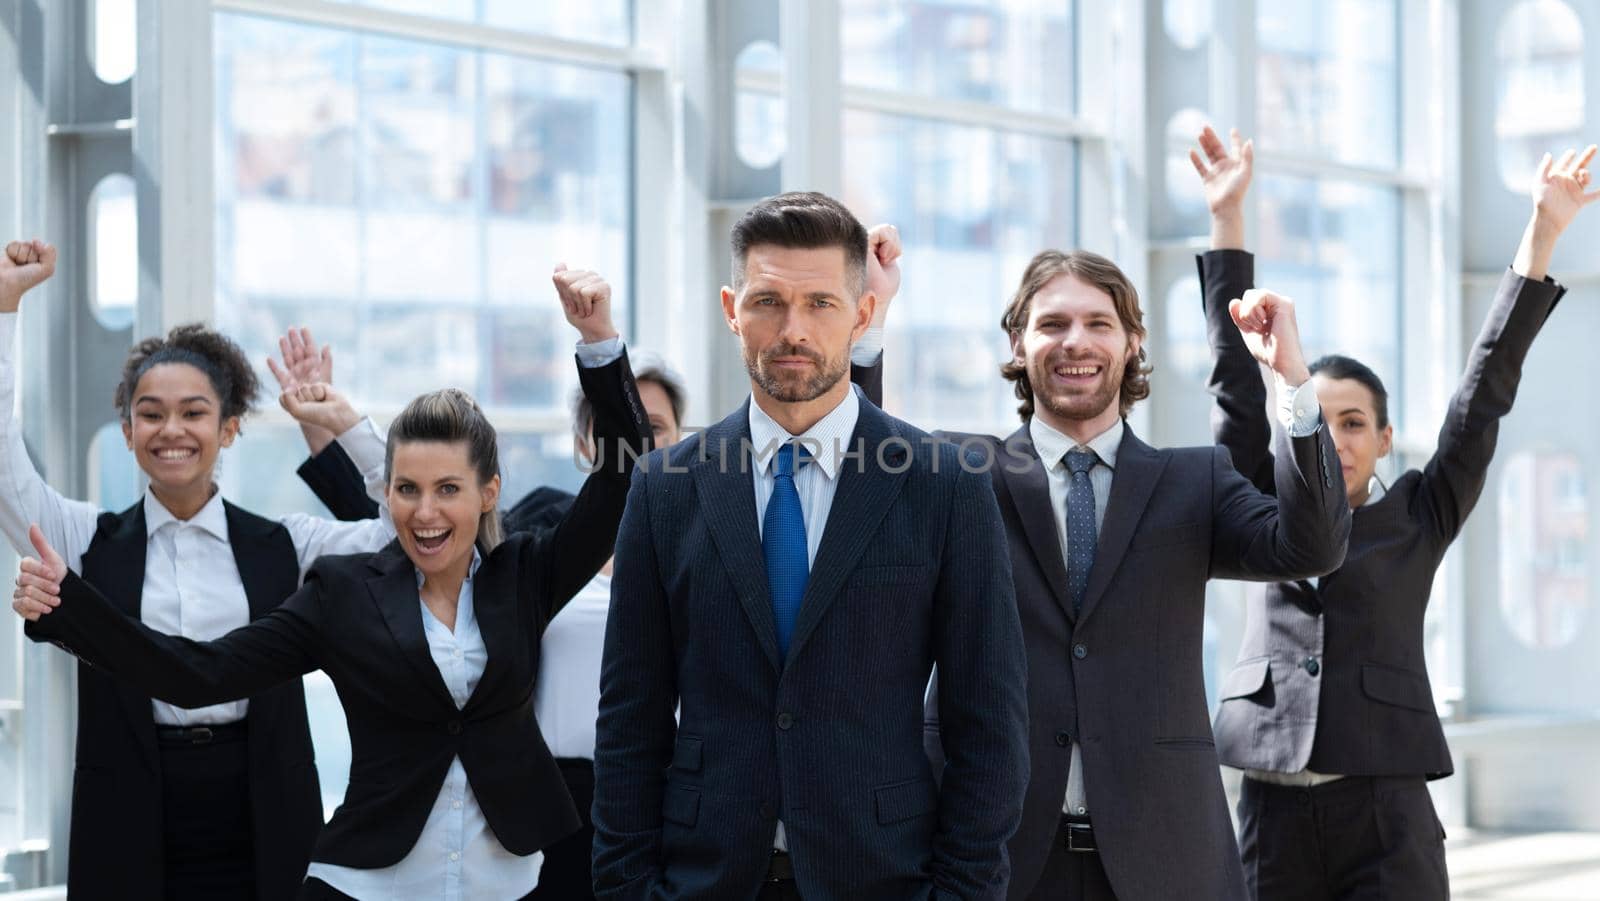 Business winners team. Group of happy people in formal wear celebrating, gesturing, keeping arms raised and expressing positivity